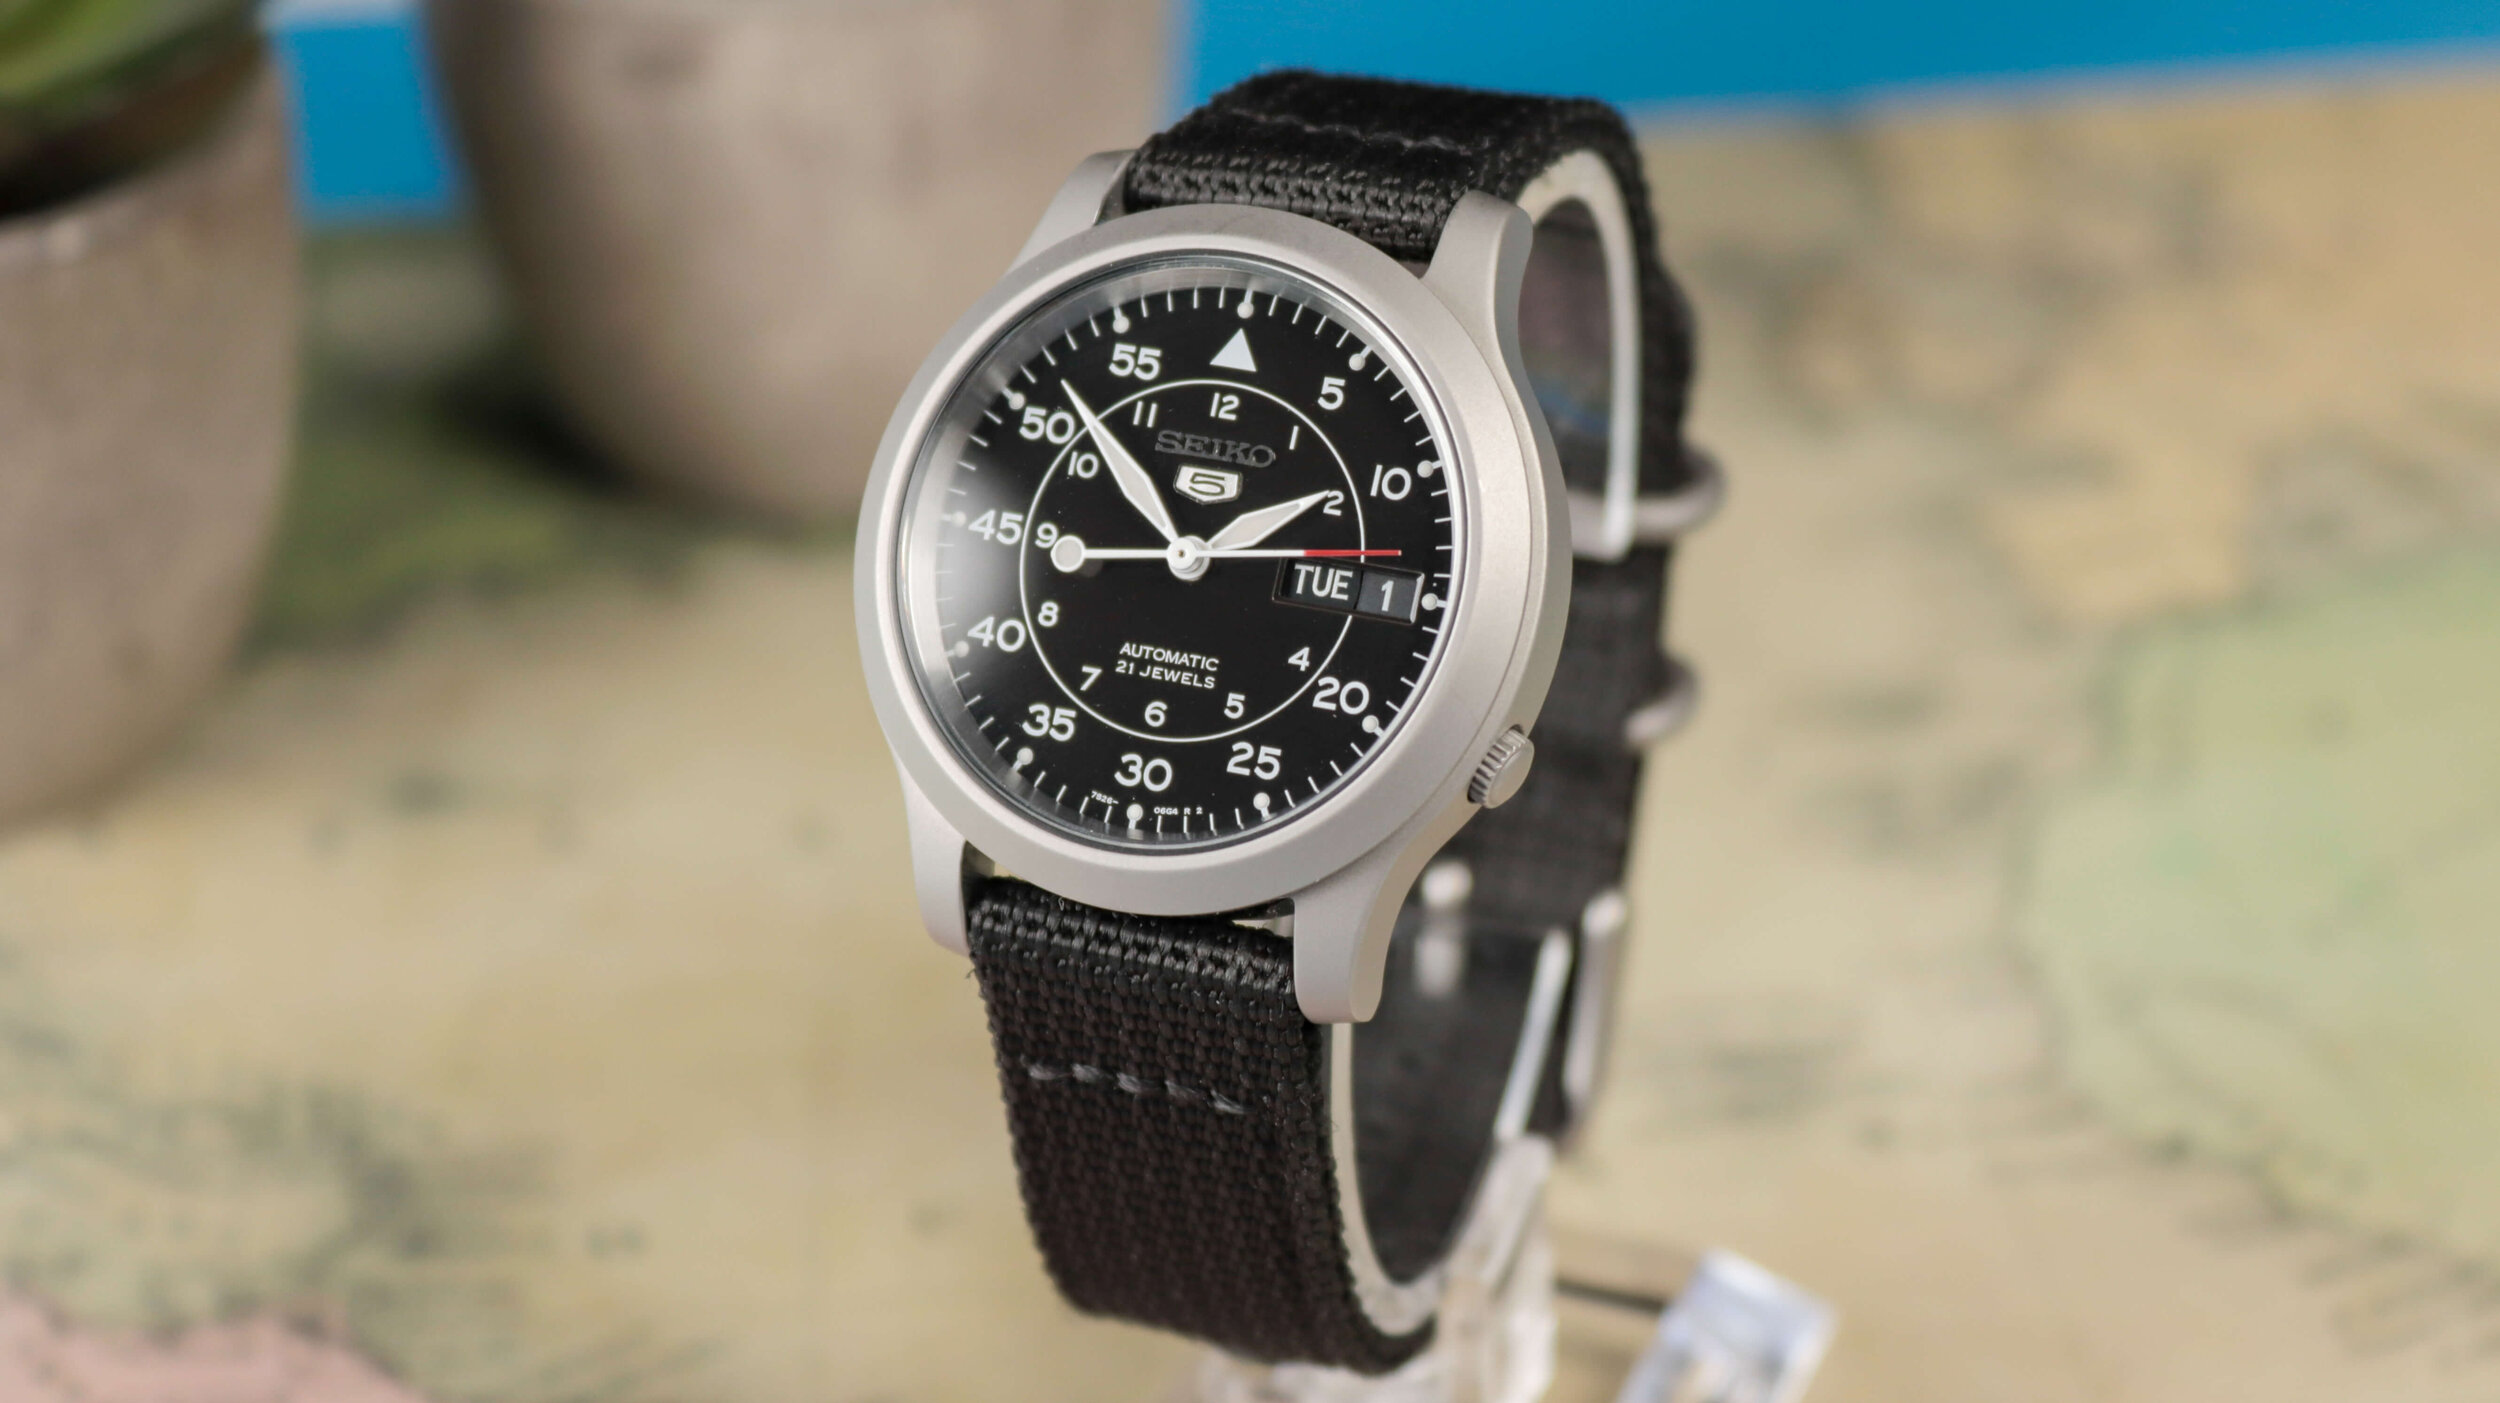 drivhus Ripples Kvittering Seiko 5 Military Watch Review (SNK809) - How This Watch Gets You Hooked —  Ben's Watch Club